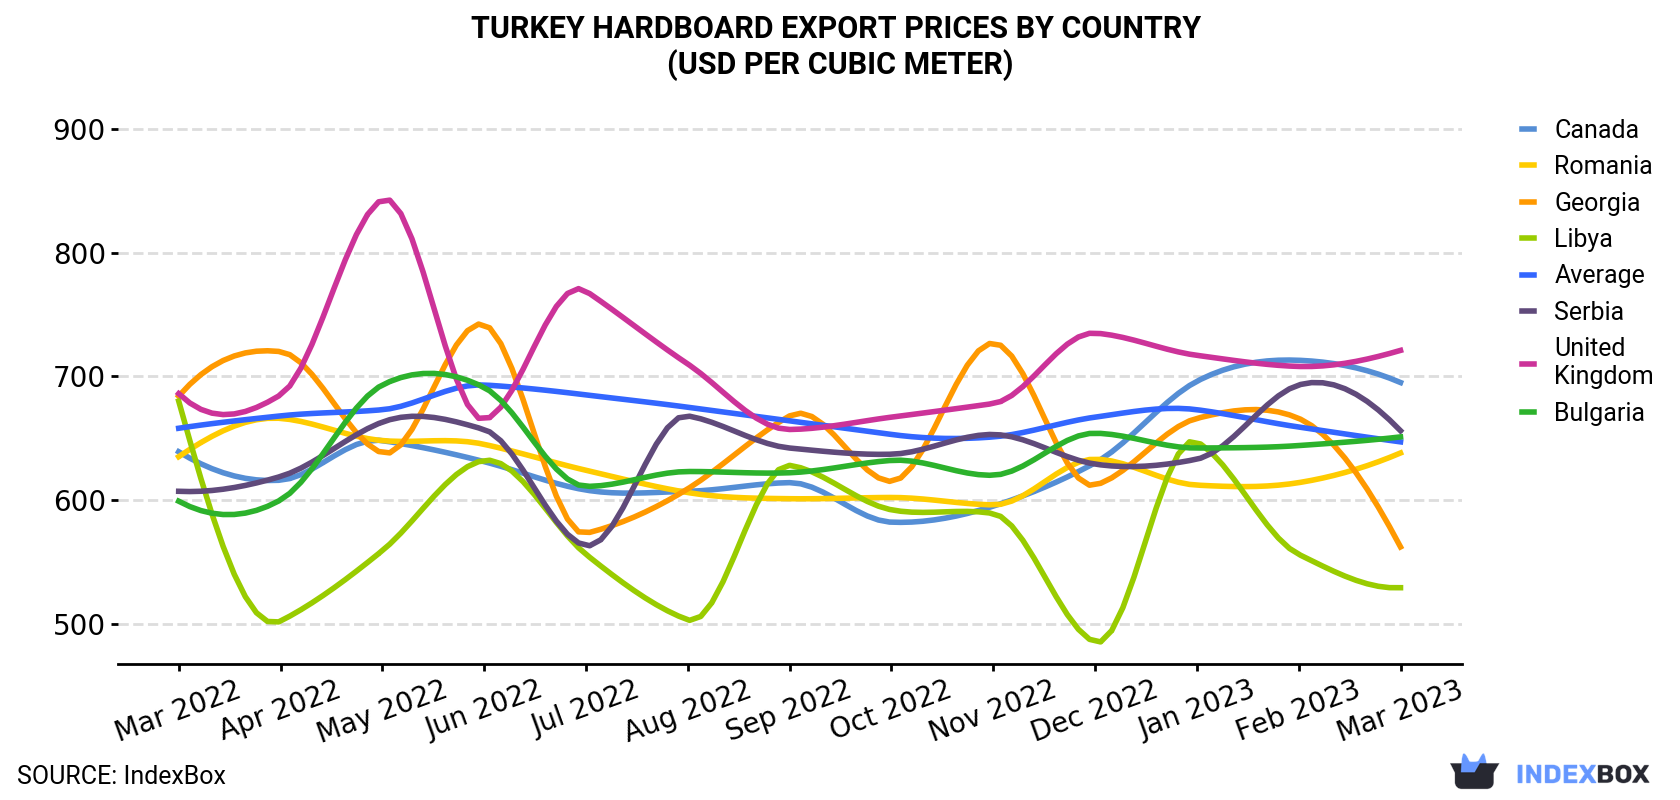 Turkey Hardboard Export Prices By Country (USD Per Cubic Meter)